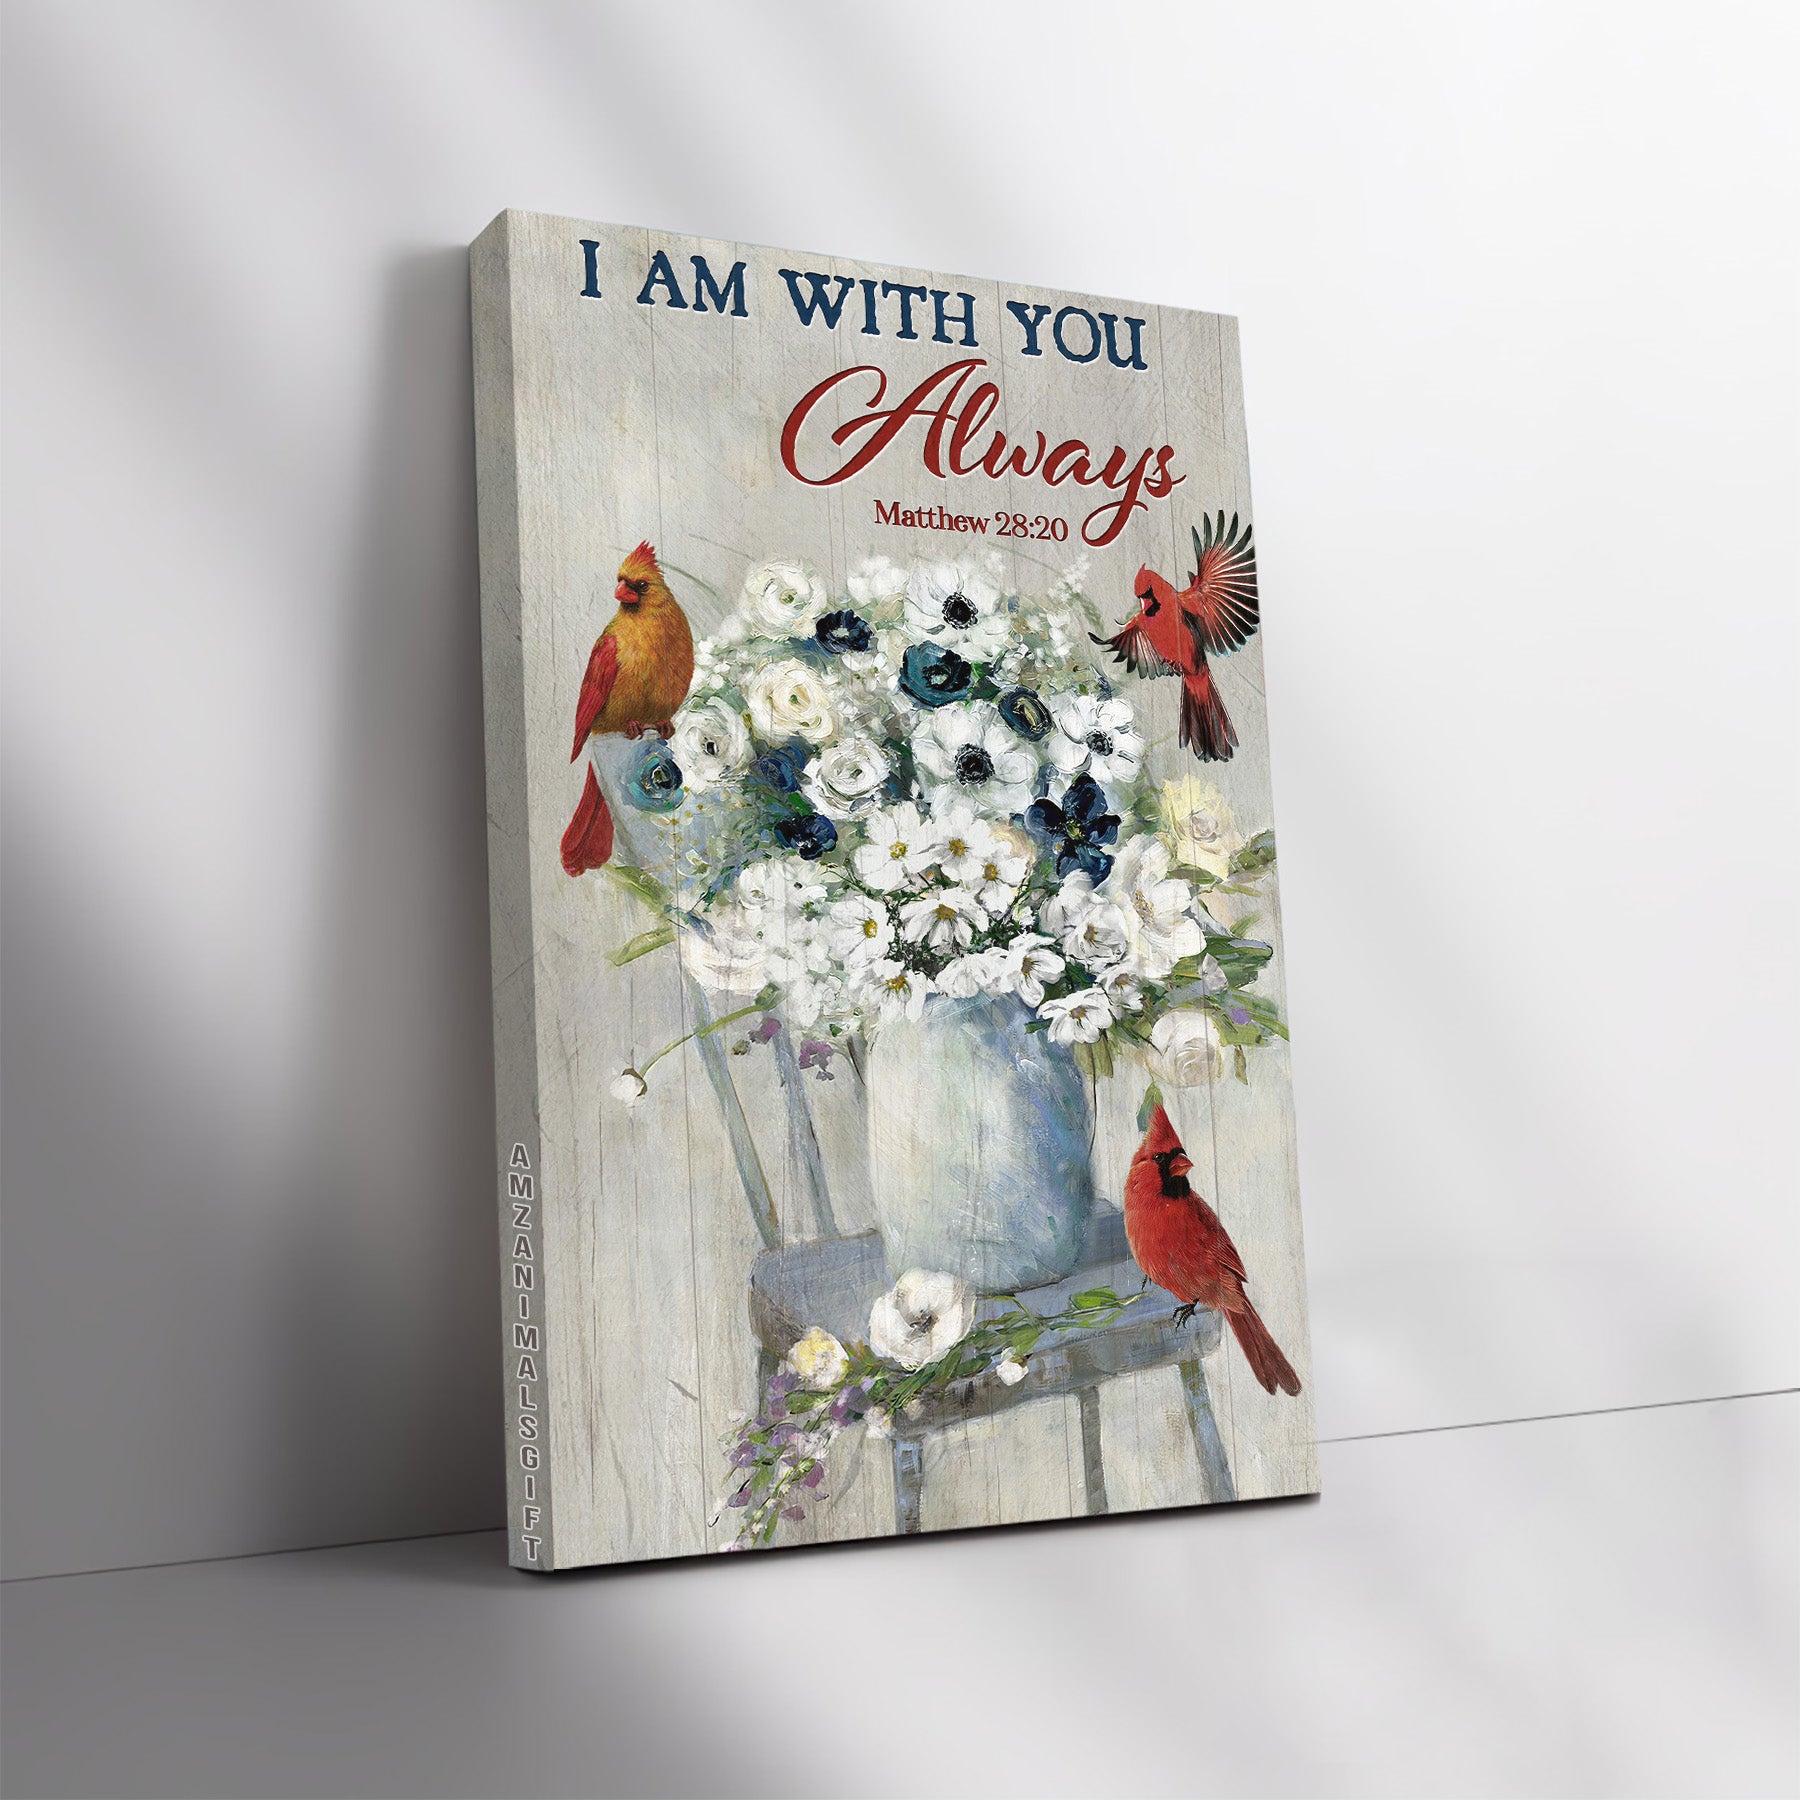 Memorial Premium Wrapped Portrait Canvas - Beautiful White Flower, Red Cardinal, Jasmine, I Am With You Always - Heaven Gift For Members Family